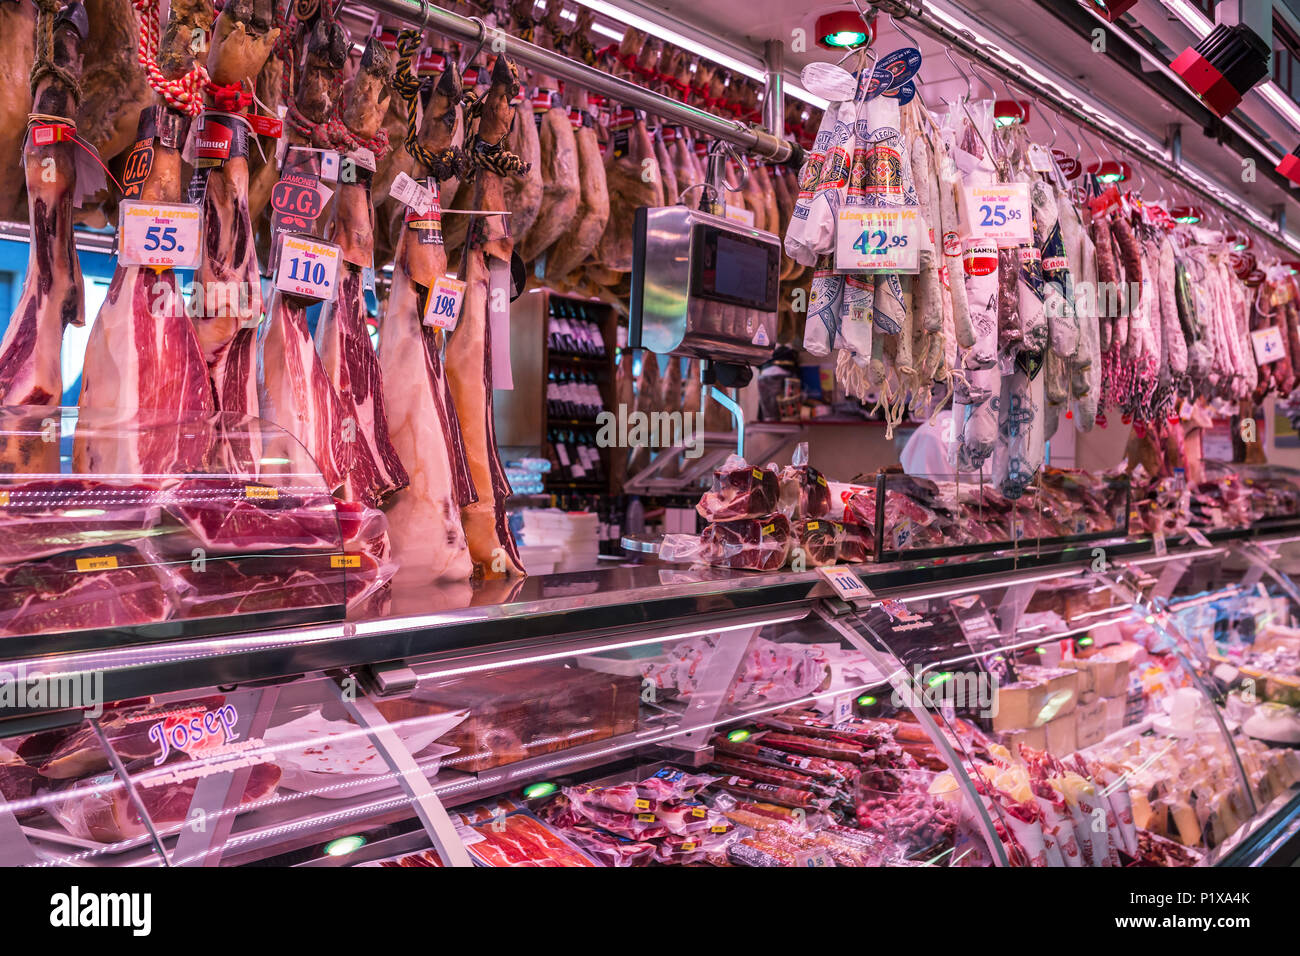 Spain, Barcelona - March 27, 2018: Boqueria market, jamon and sausages on the counter of the Spanish market Stock Photo